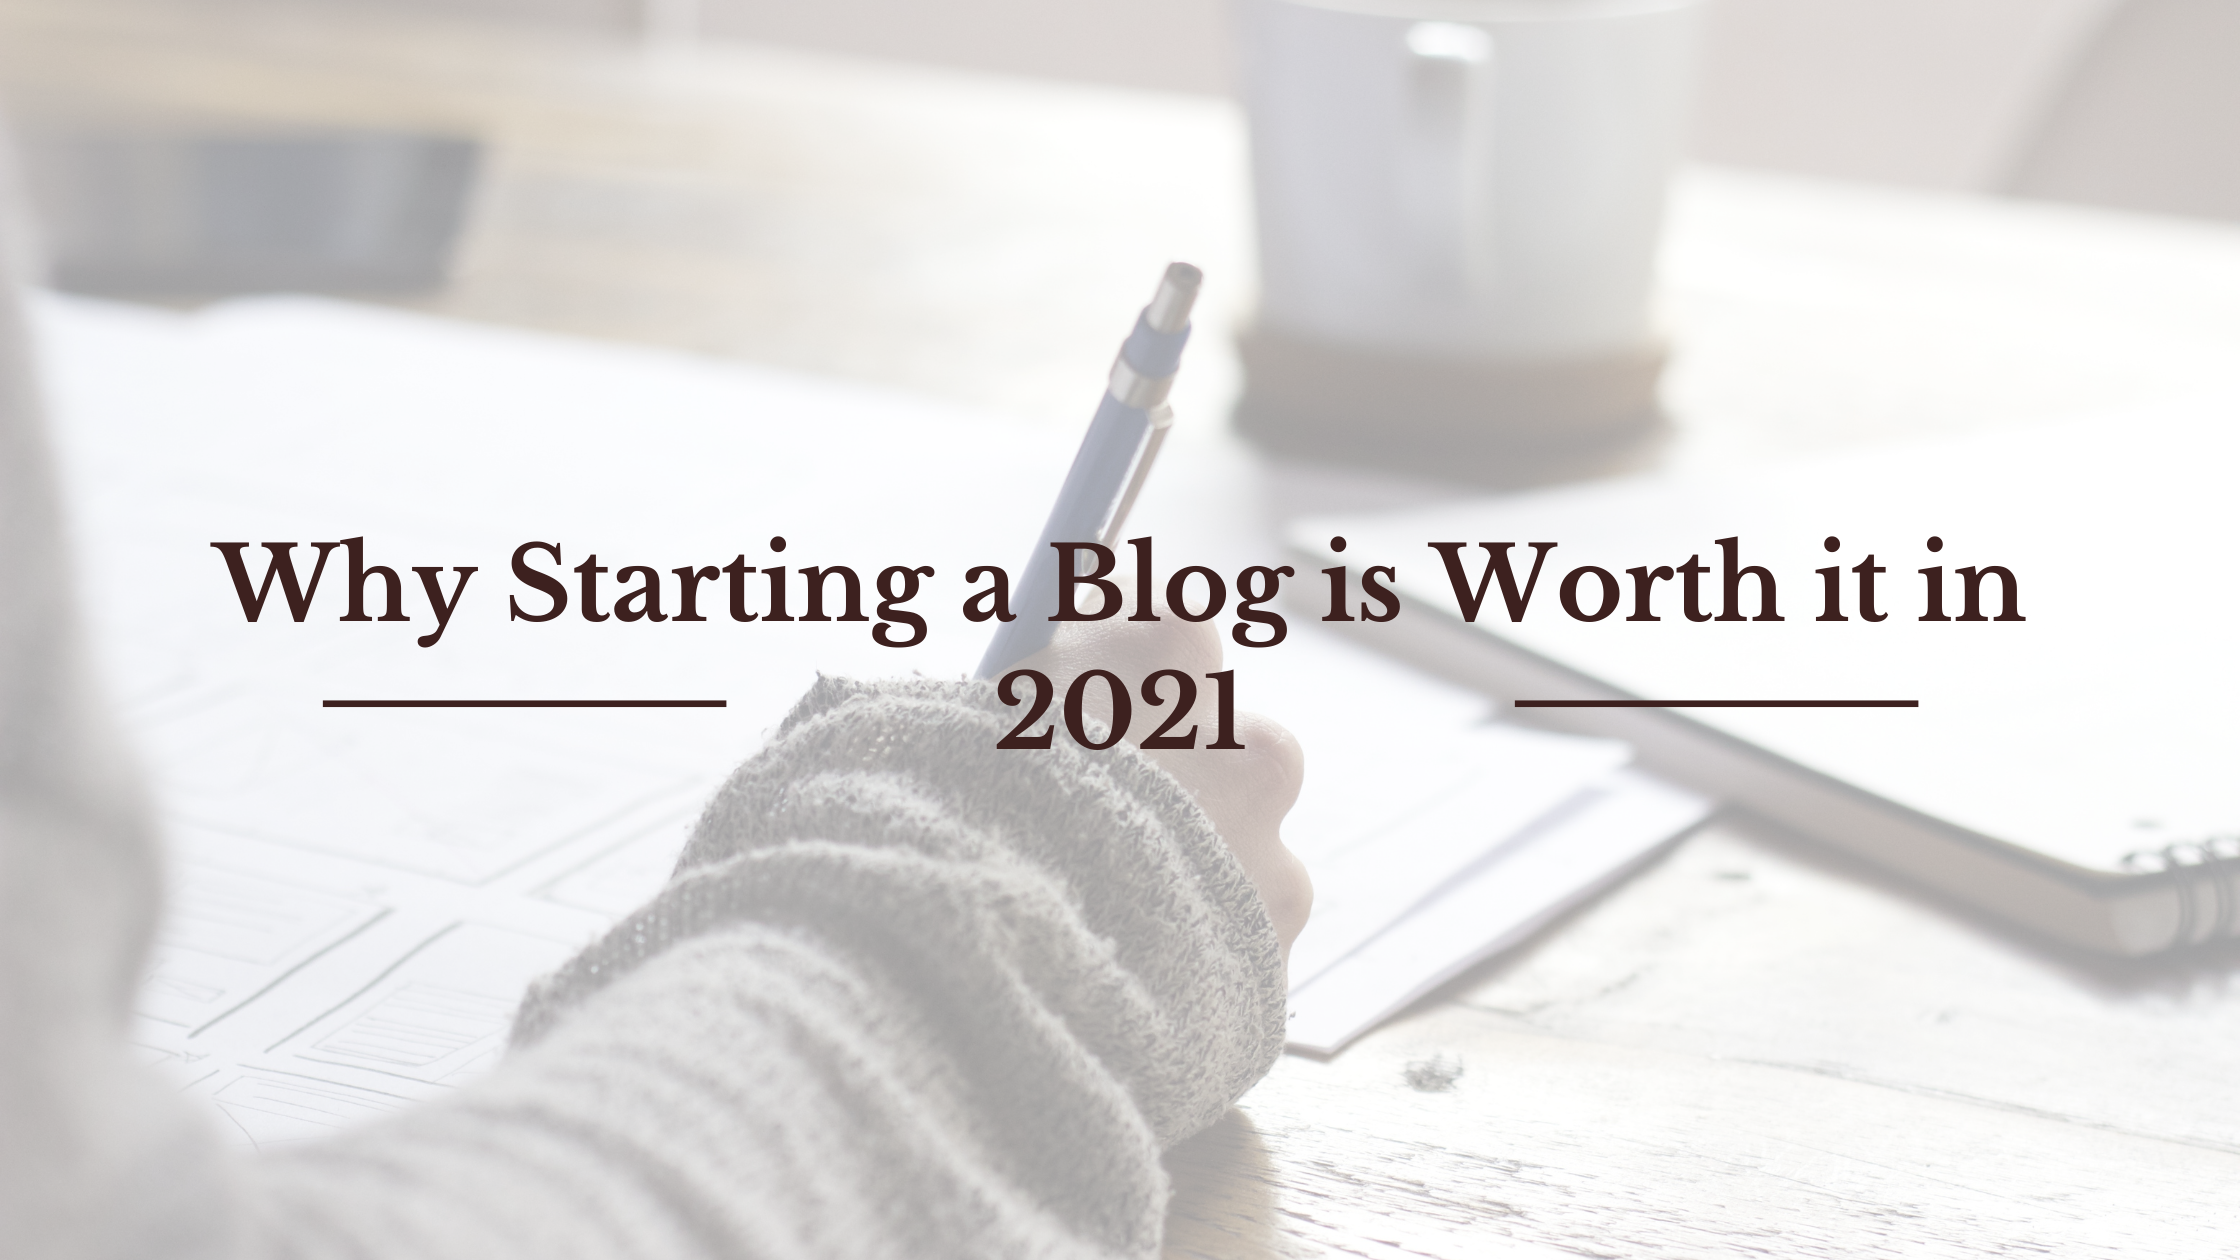 Why Starting a Blog is Worth it in 2021